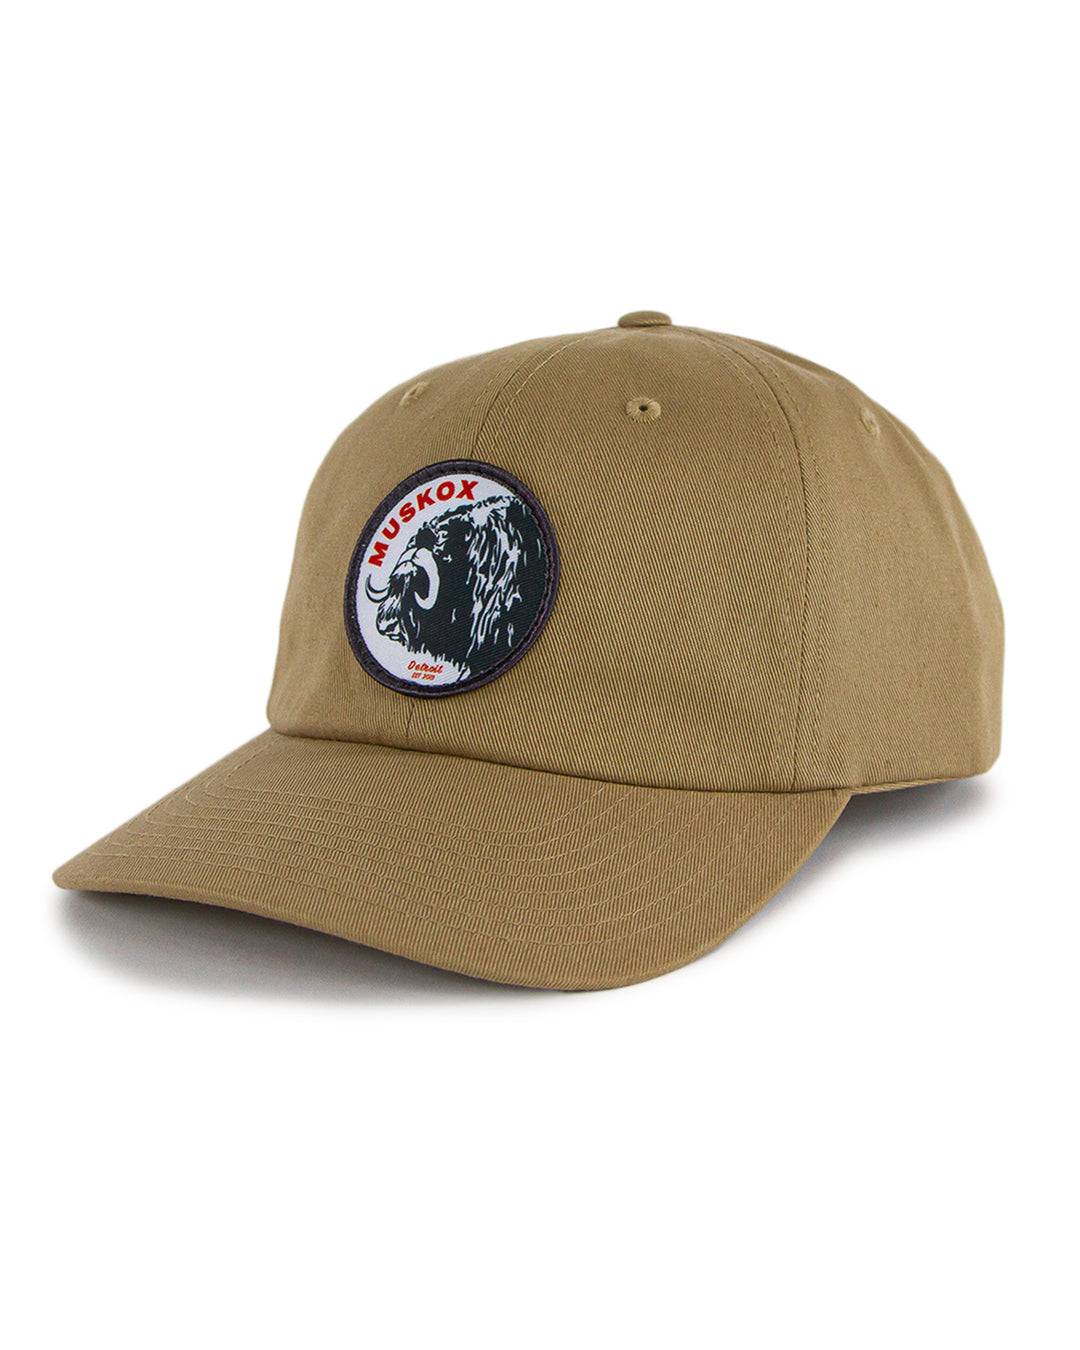 MuskOx Logo Patch Hat in Driftwood, Cotton Twill Chino Hat with Strap, Embroidered in USA